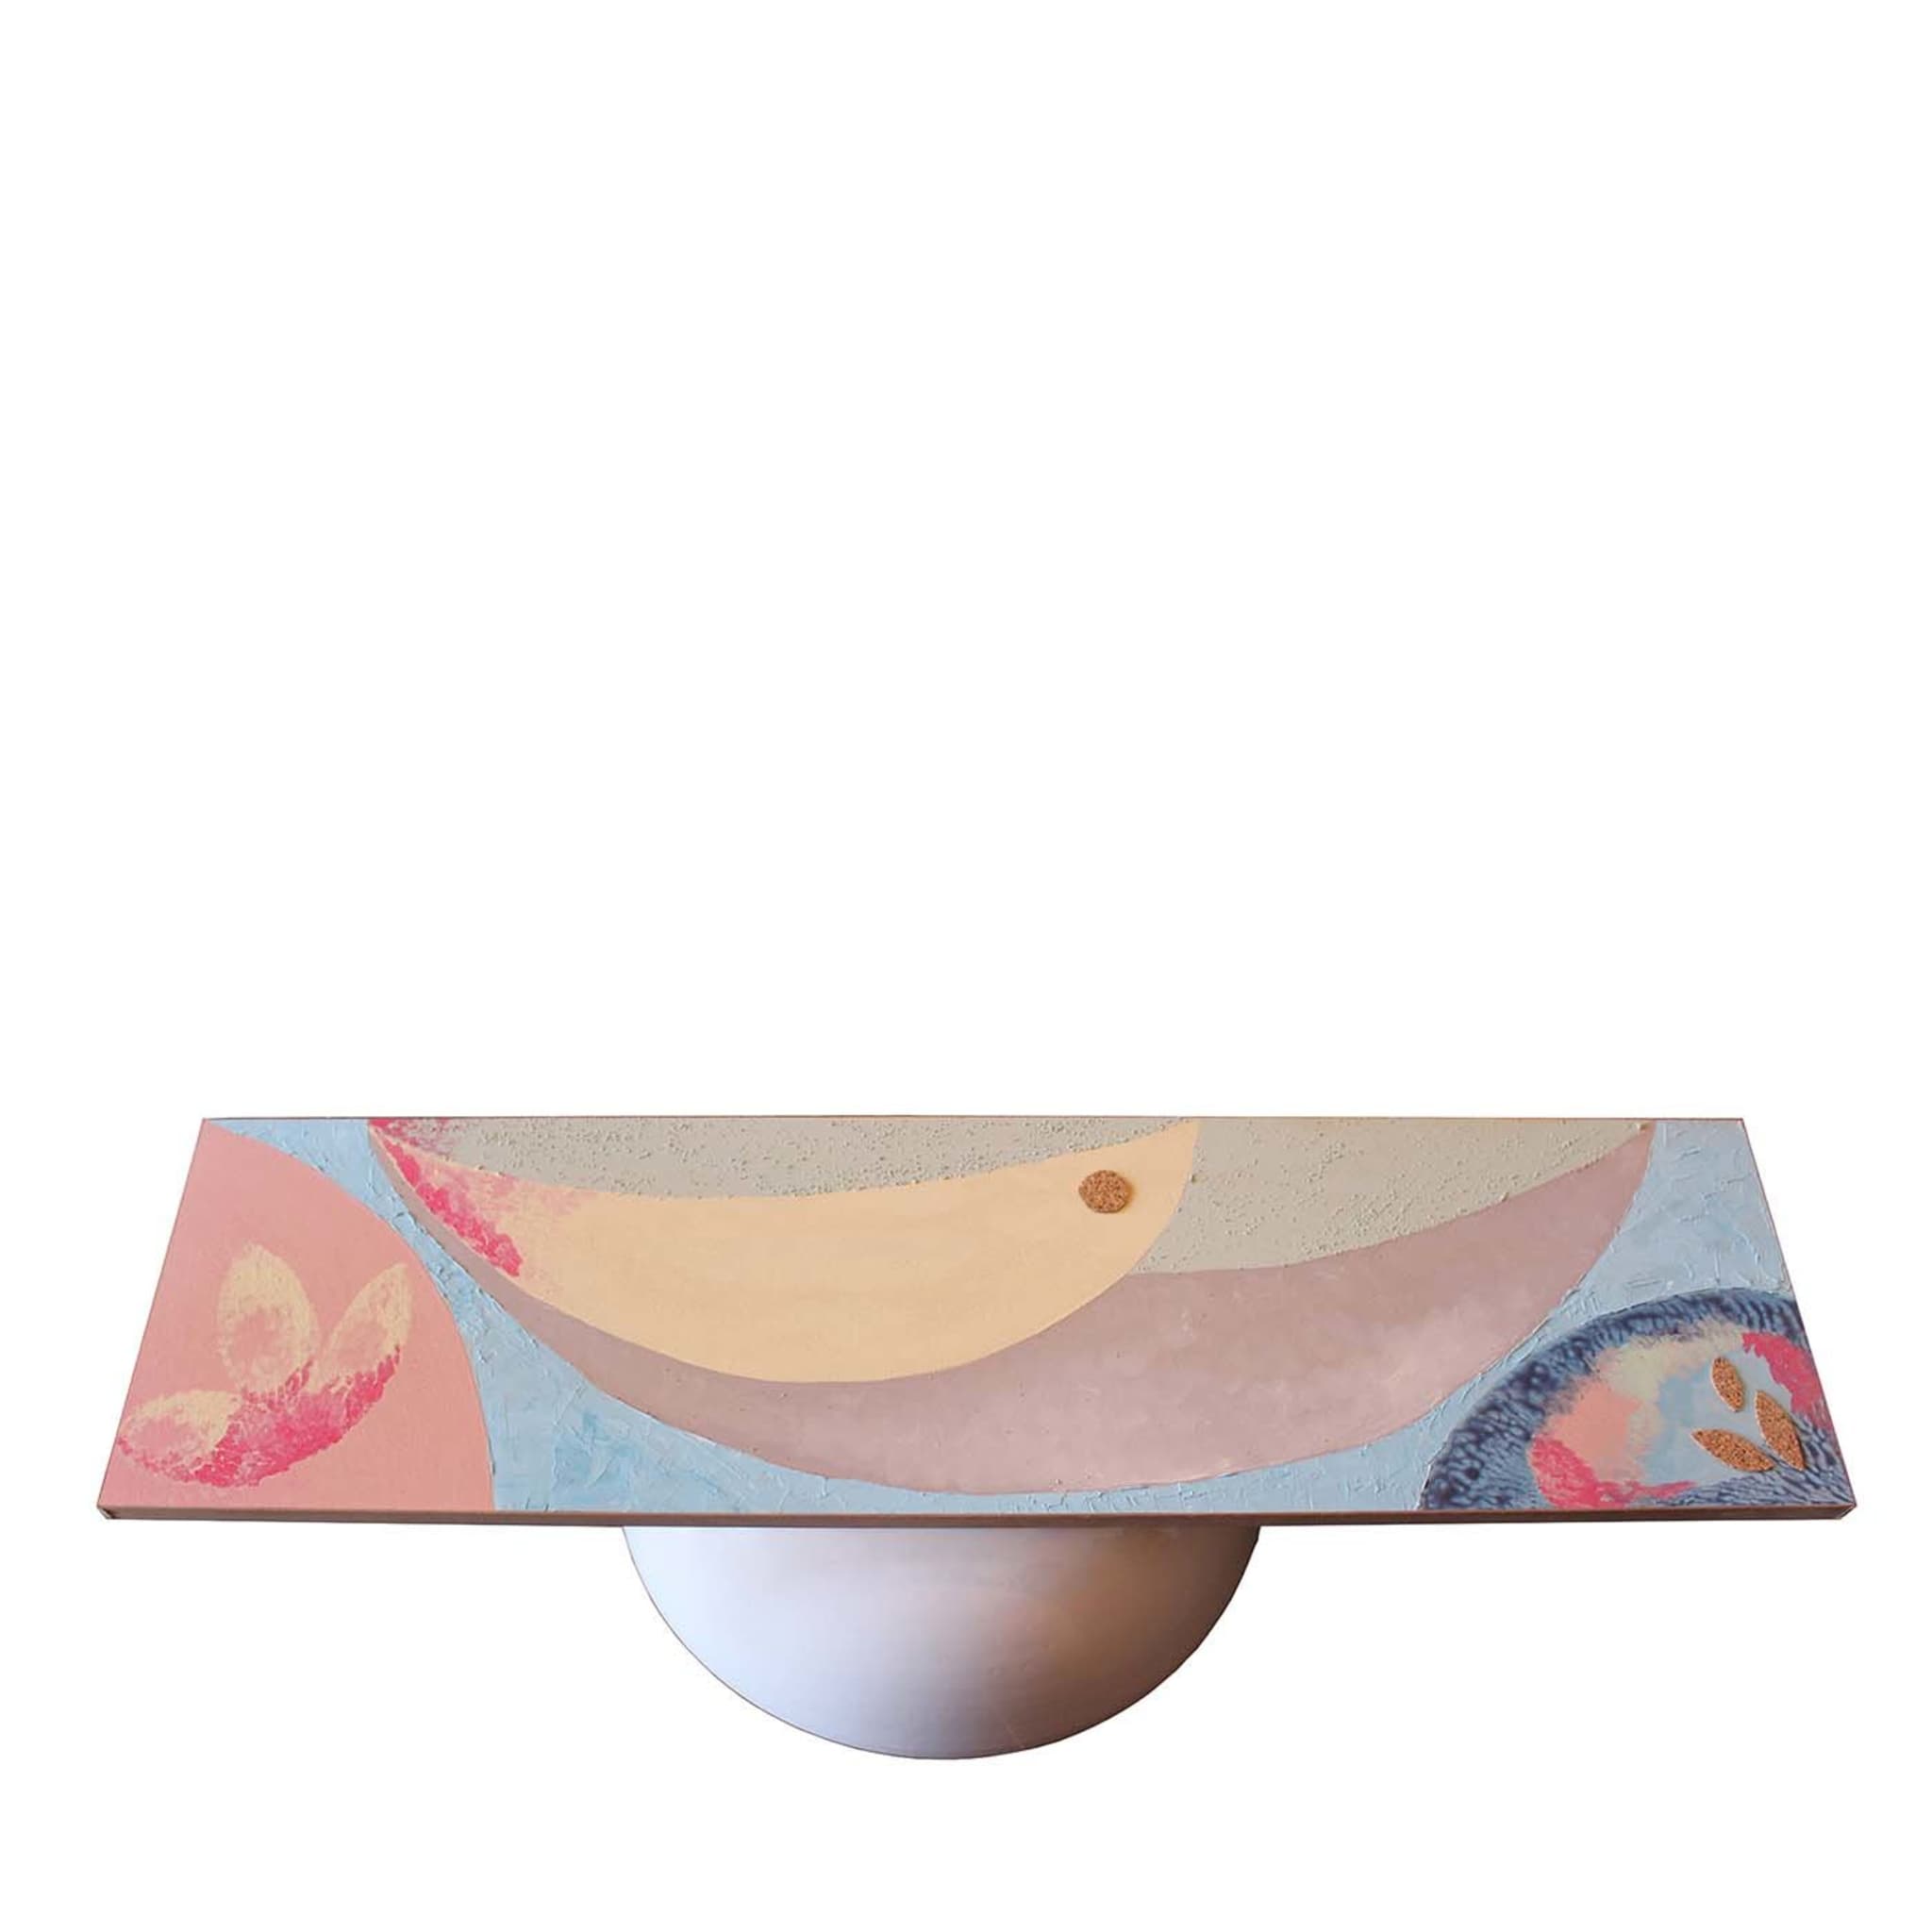 MM3 Small Coffee Table by Mascia Meccani - Main view